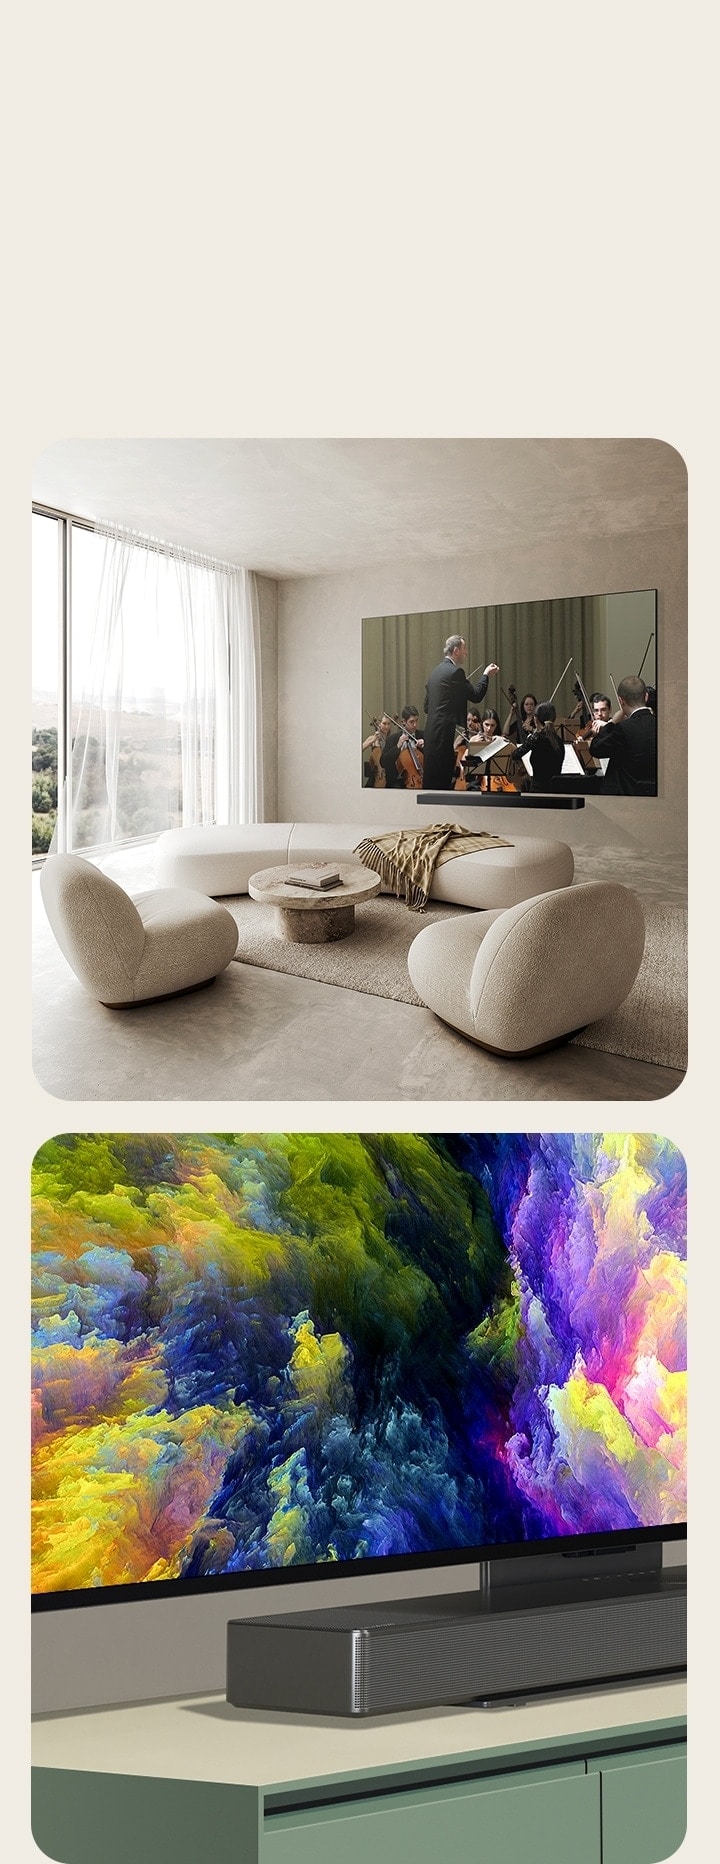 An angled perspective of the bottom corner of OLED C4 showing an abstract artwork on the screen.  OLED C4 and an LG Soundbar in a clean living space flat against the wall with an orchestral performance playing on screen.